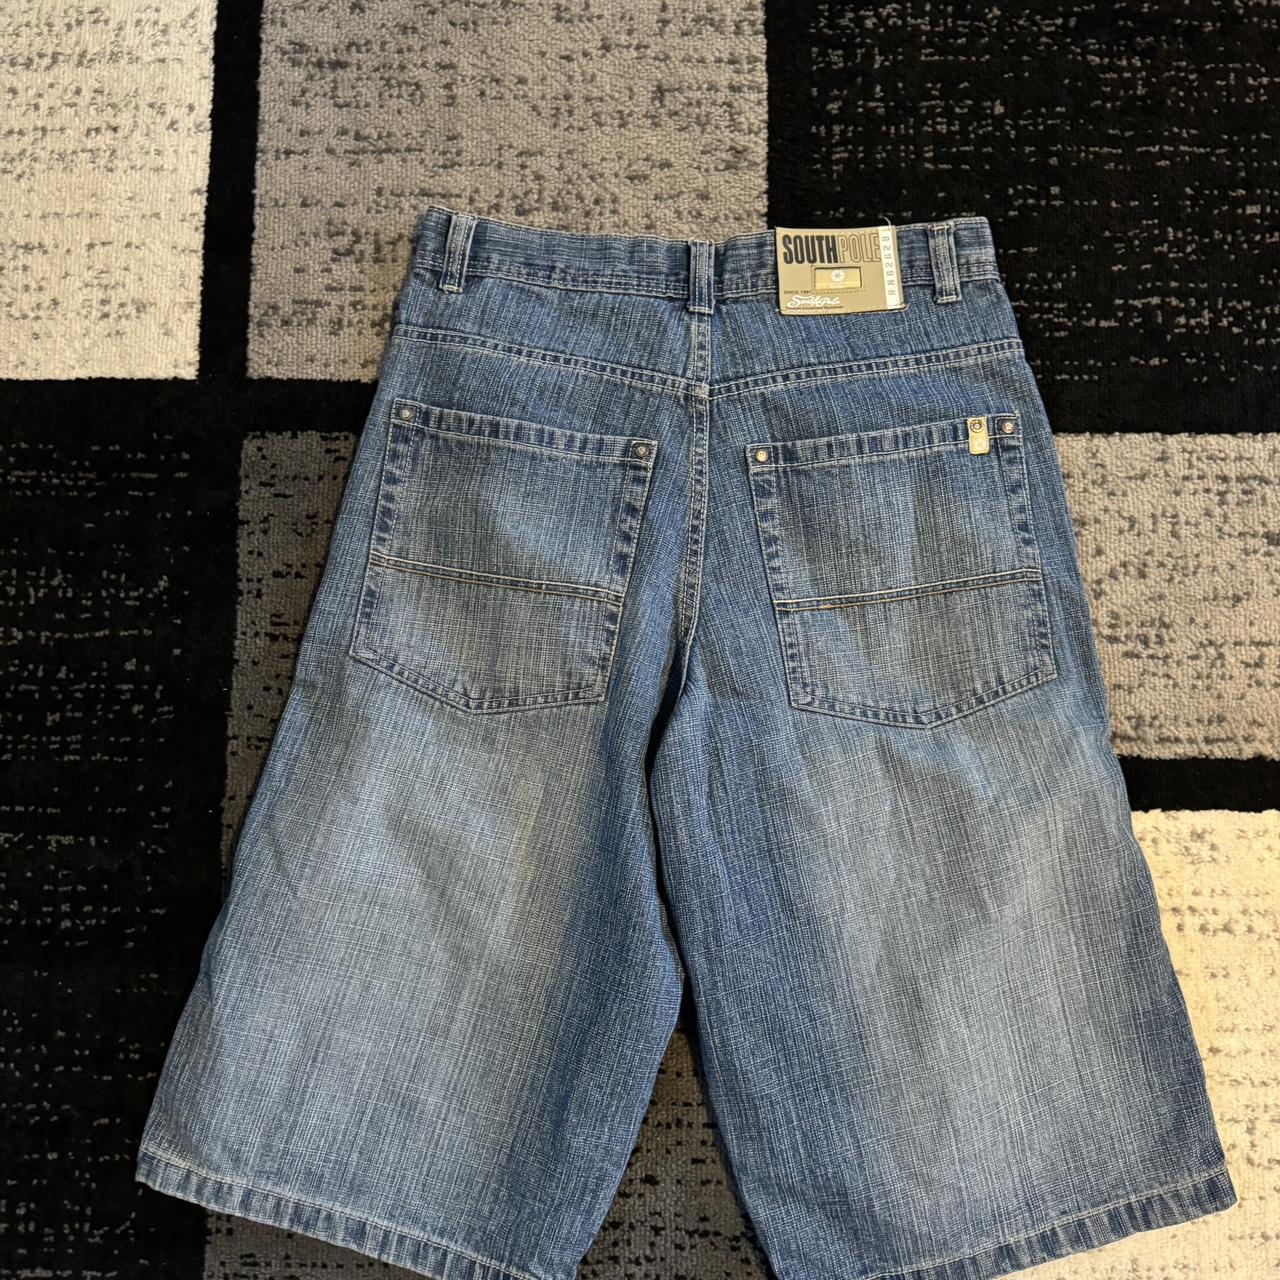 Southpole Jorts Great condition - Depop